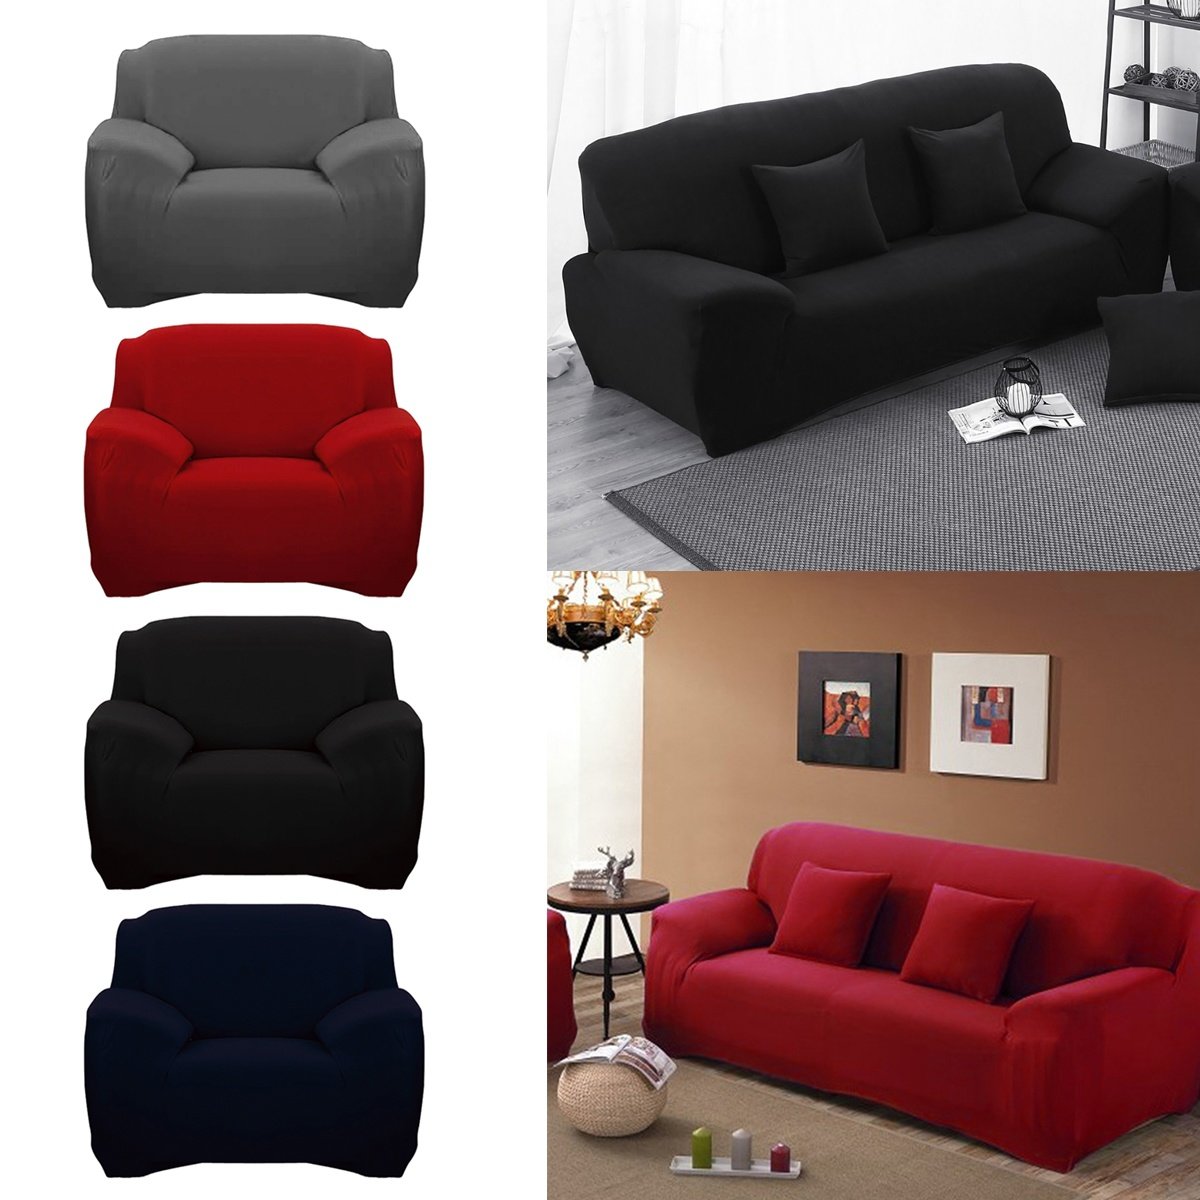 

L Shape Stretch Elastic Fabric Sofa Cover Pet Dog Sectional Corner Solid Color Couch Cover, Coffee red white grey black